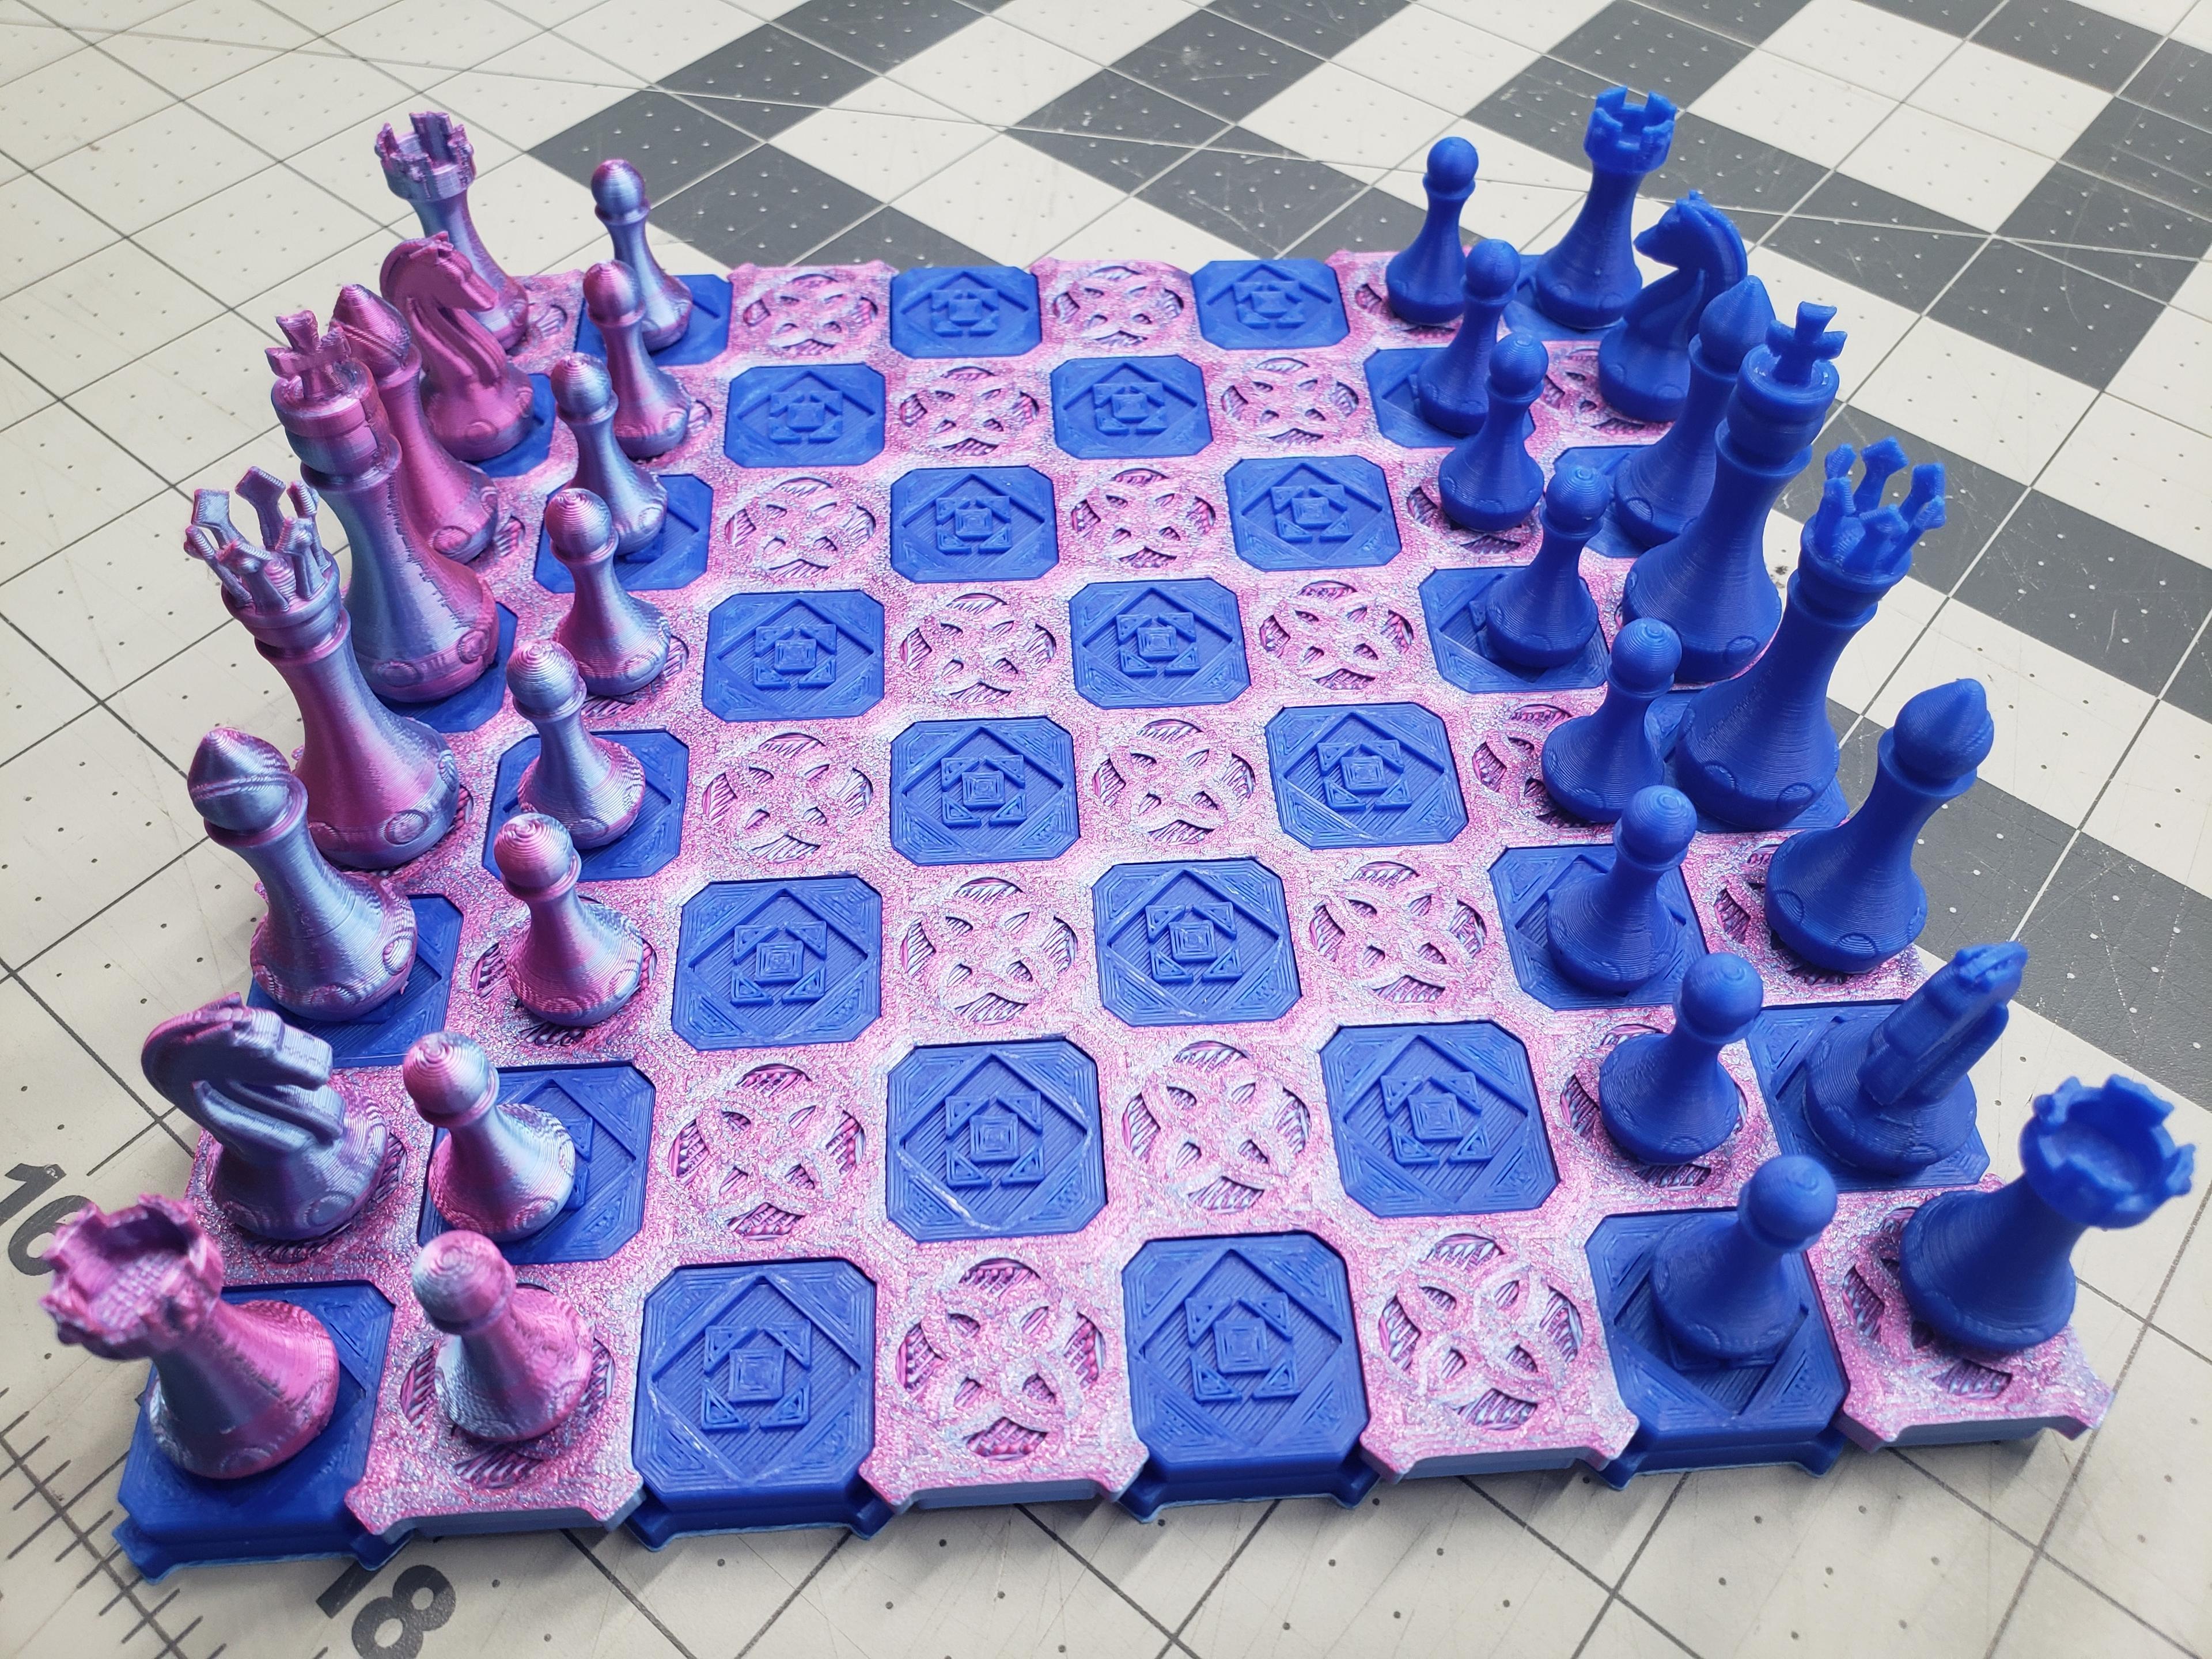 Patterned Chess Set (Ruby-Sapphire) 3d model